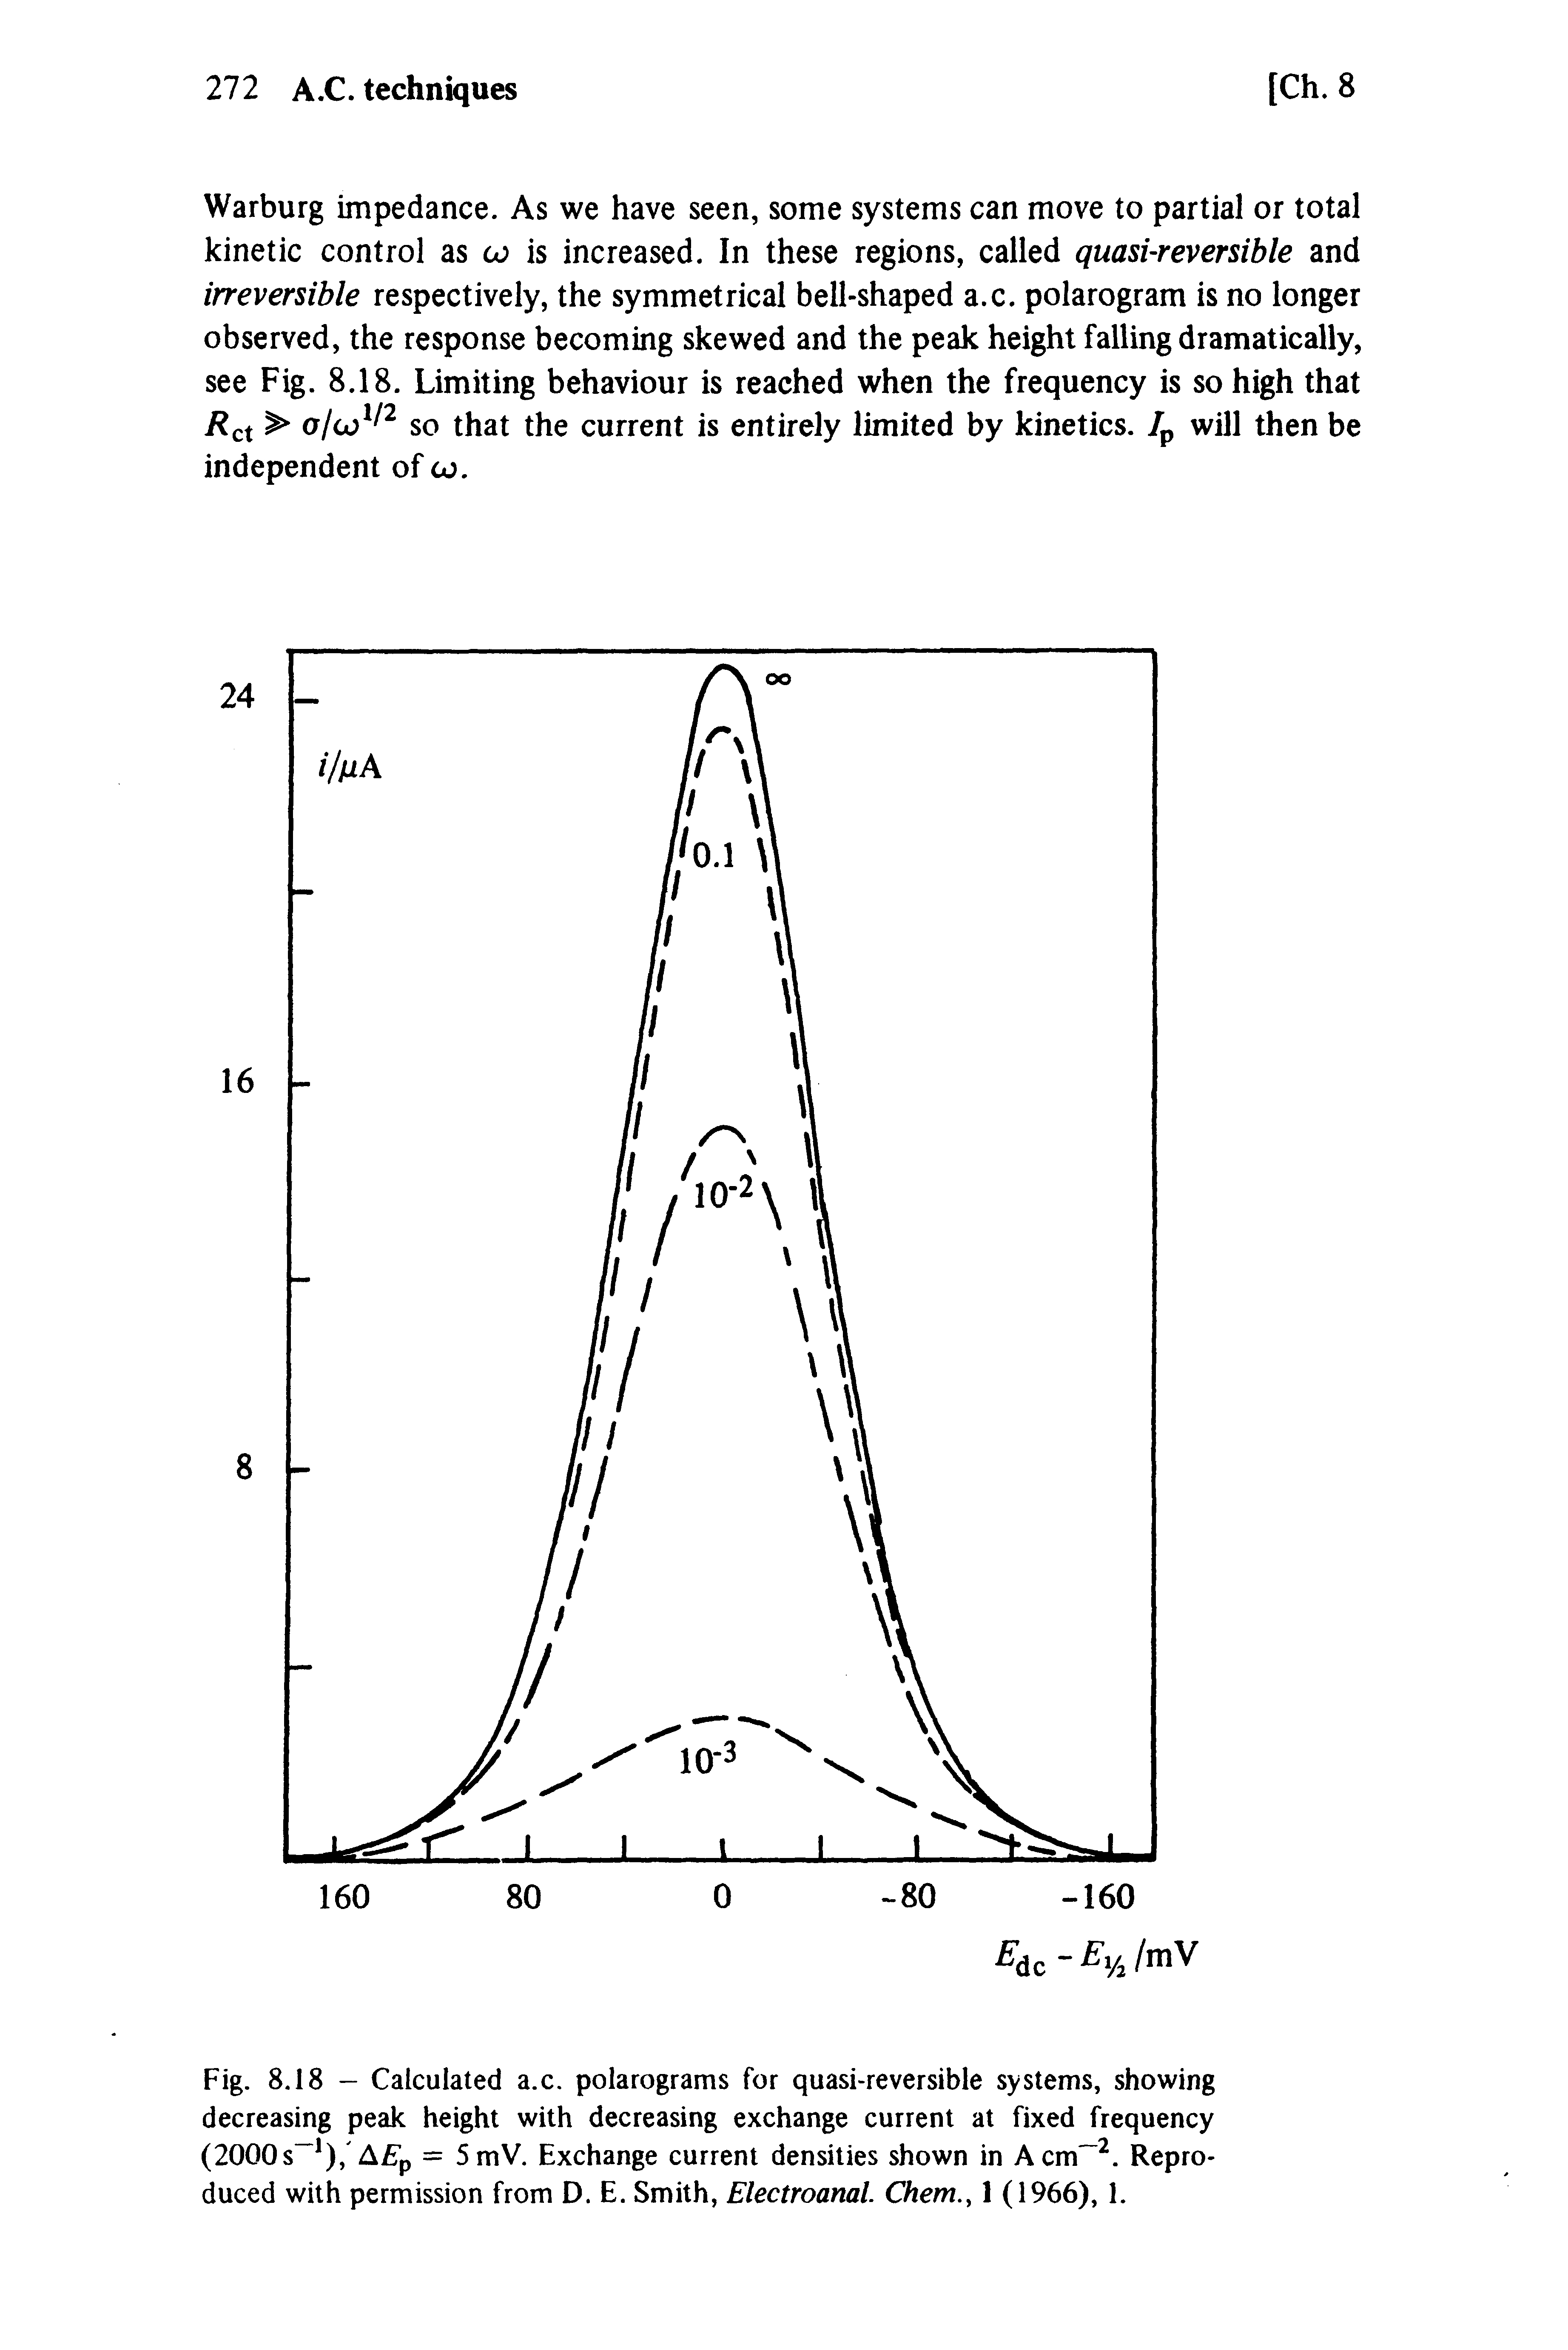 Fig. 8.18 - Calculated a.c. polarograms for quasi-reversible systems, showing decreasing peak height with decreasing exchange current at fixed frequency (2000s ), A p = 5 mV. Exchange current densities shown in Acm. Reproduced with permission from D. E. Smith, Electroanal Chem., 1 (1966), 1.